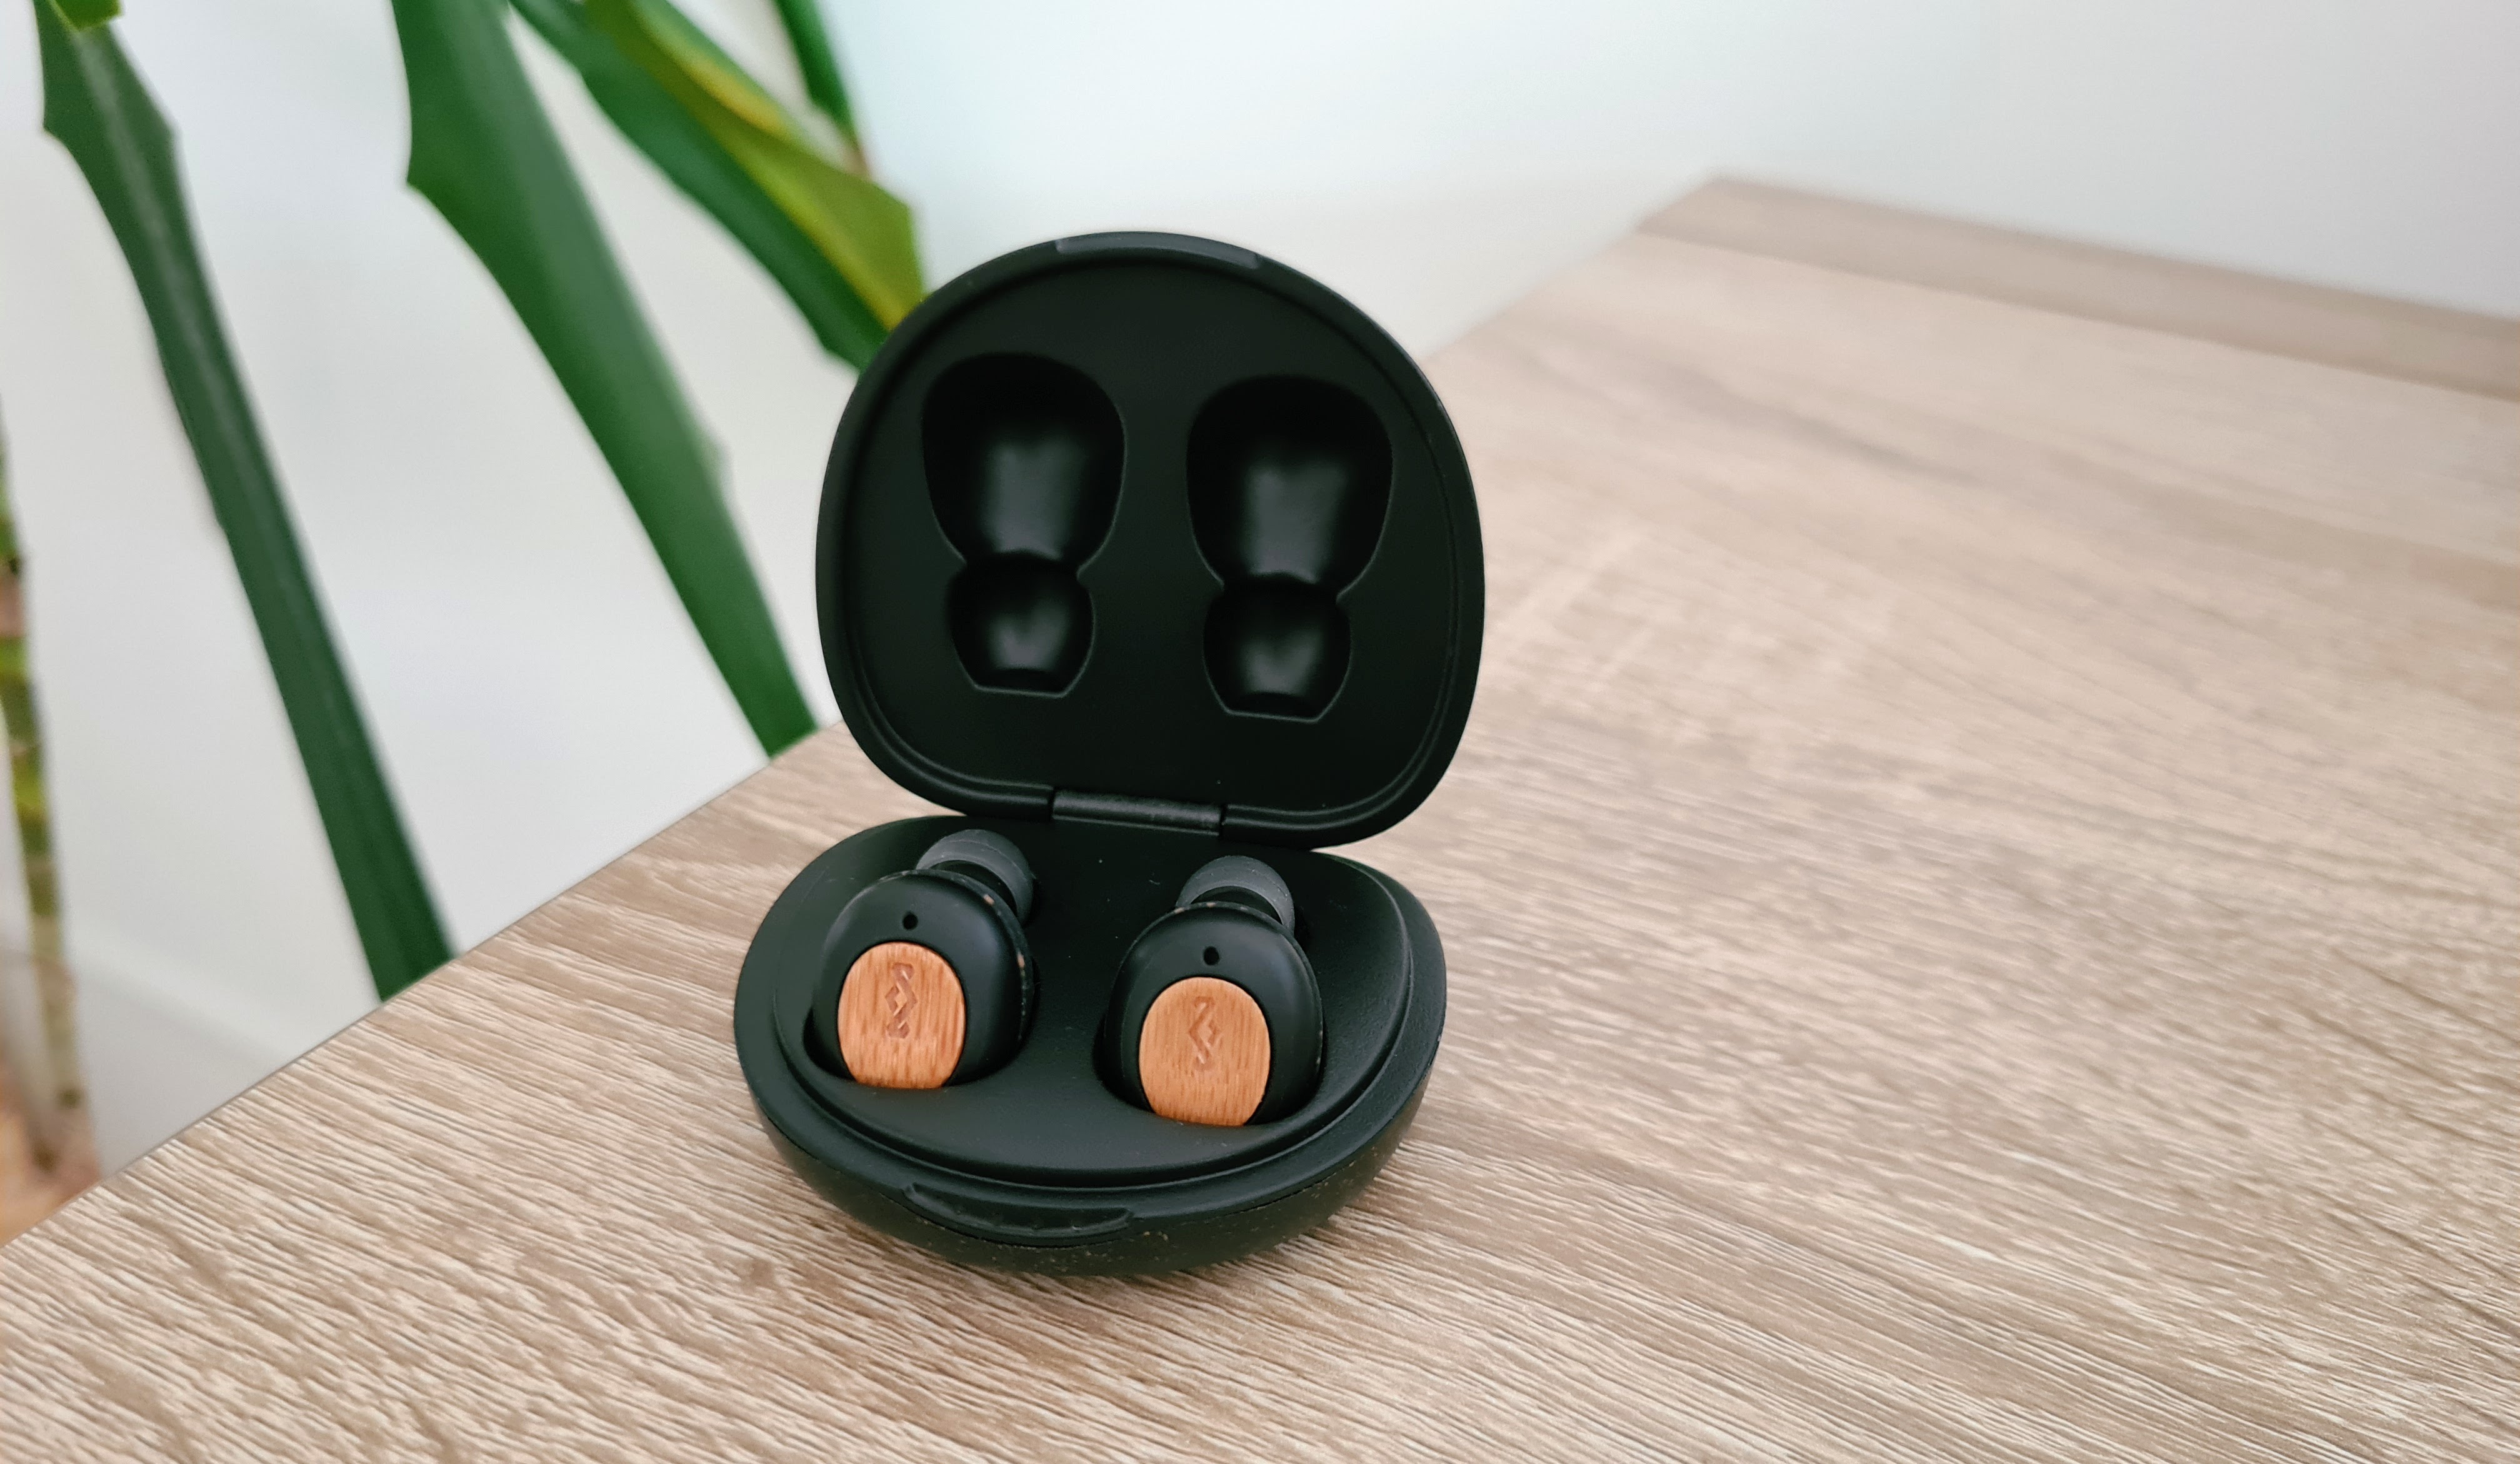 House of Marley Little Bird review: True wireless earbuds on a budget